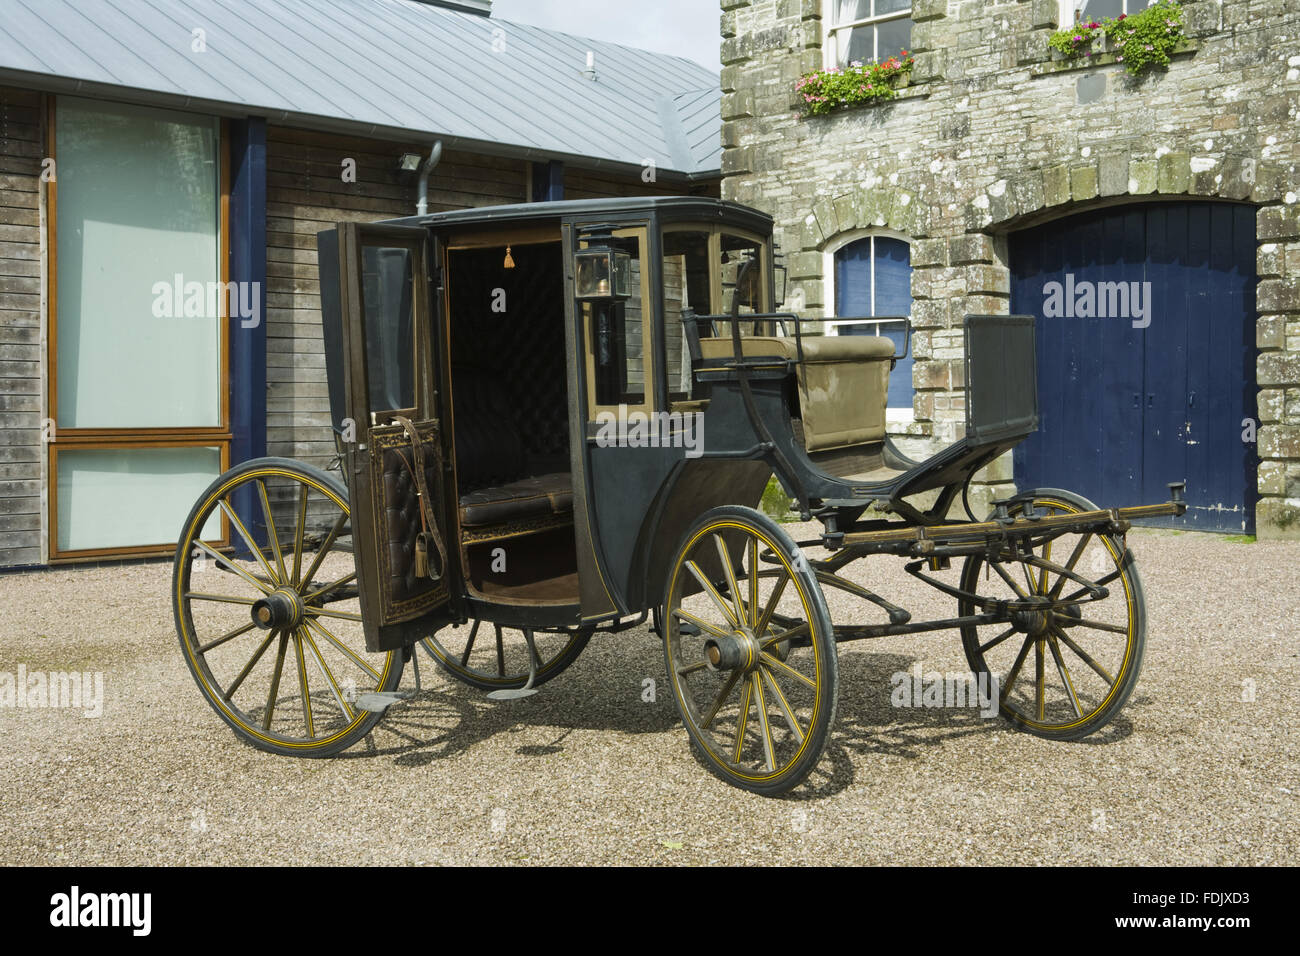 Planet Centorus  - Pagina 4 The-double-brougham-1893-part-of-the-national-trusts-carriage-museum-FDJXD3